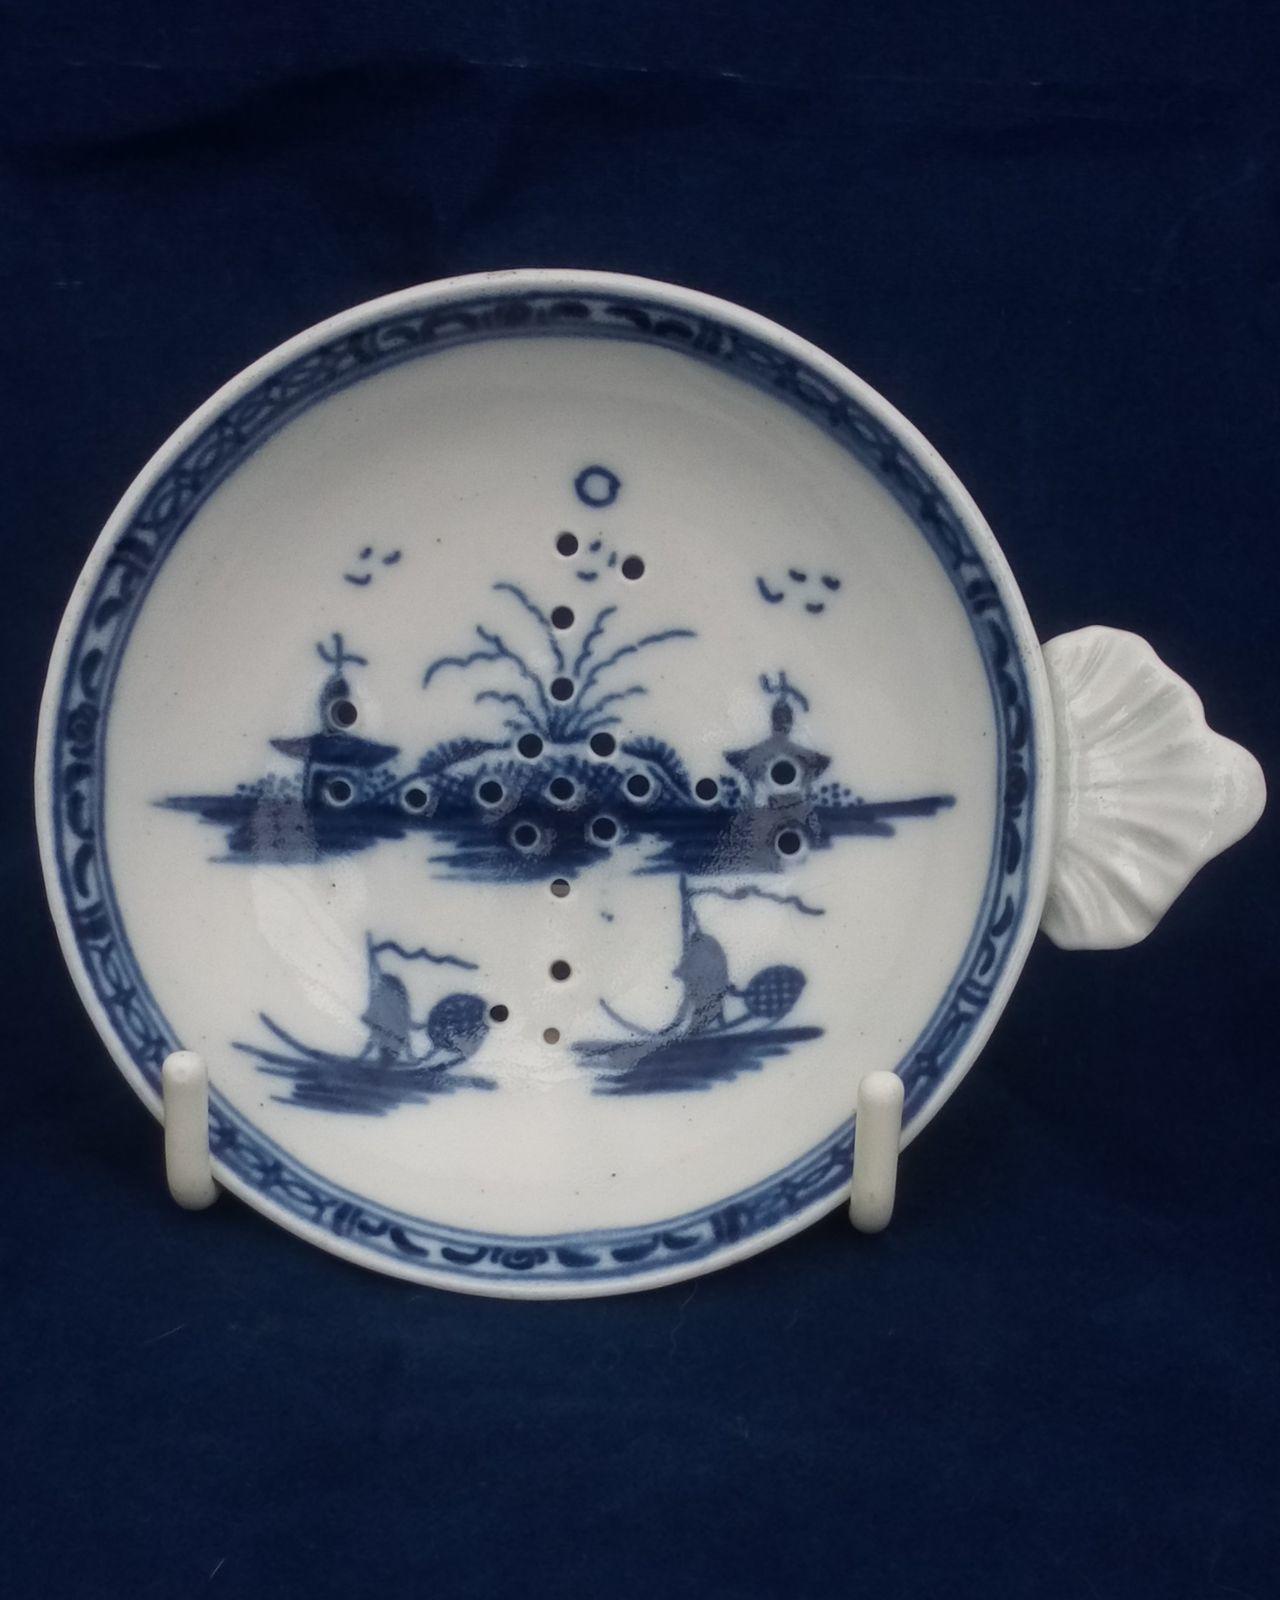 Rare shaped antique Caughley miniature or toy porcelain blue and white hand painted Island pattern Milsey or Strainer circa 1780 with shell shaped handle and Buddhist swastika peace pattern piercing.